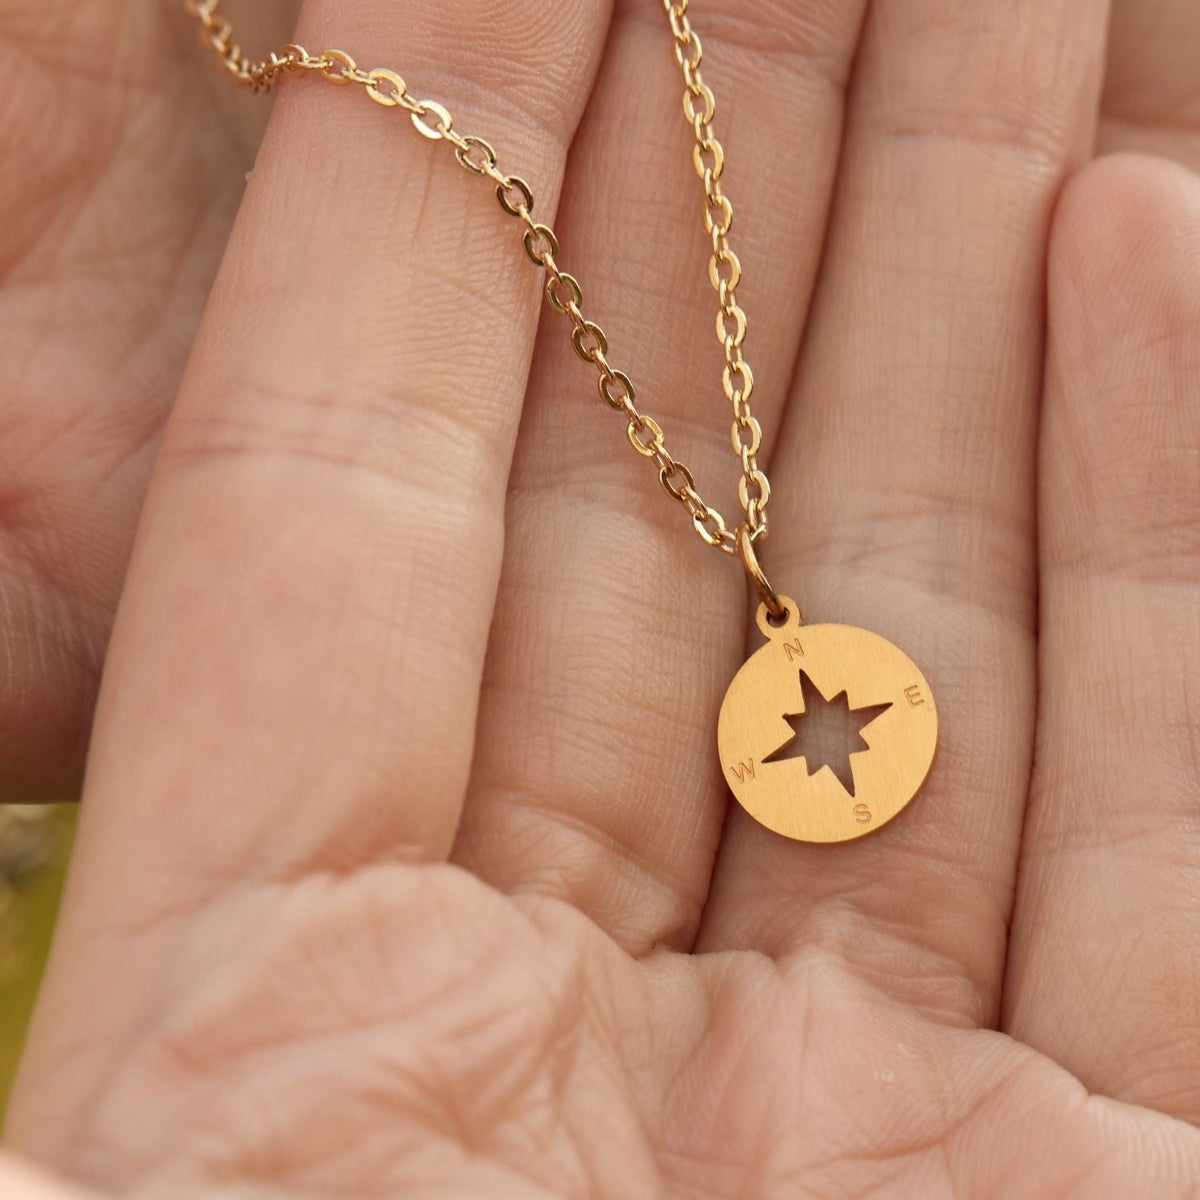 True Friendship | Grateful God Brought You Into My Life | Compass Necklace